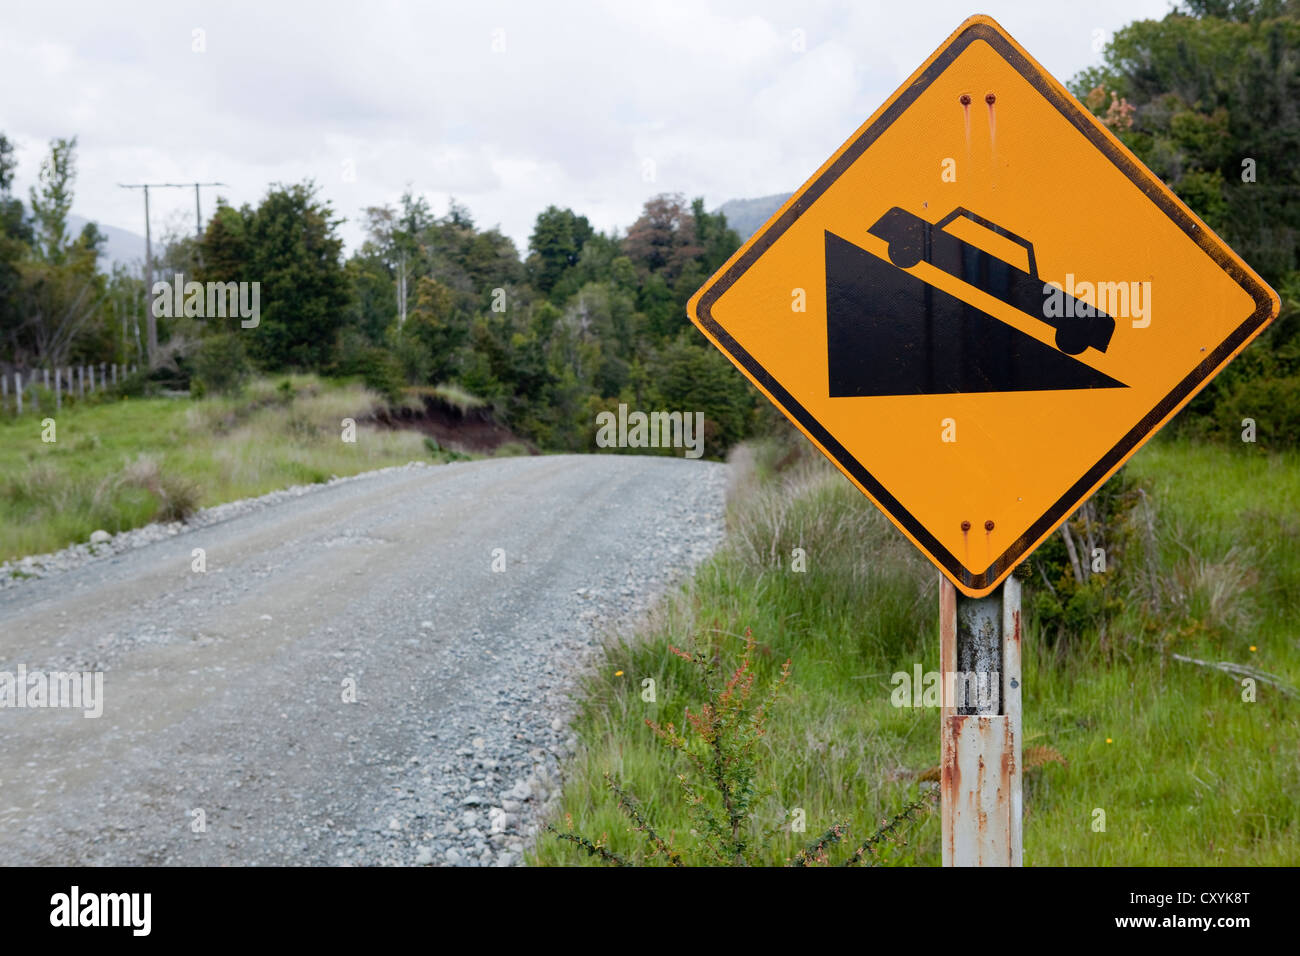 Chilean street sign, caution slope, Carretera Austral, Ruta CH7 road, Panamerican Highway, Region de Aysen, Patagonia, Chile Stock Photo